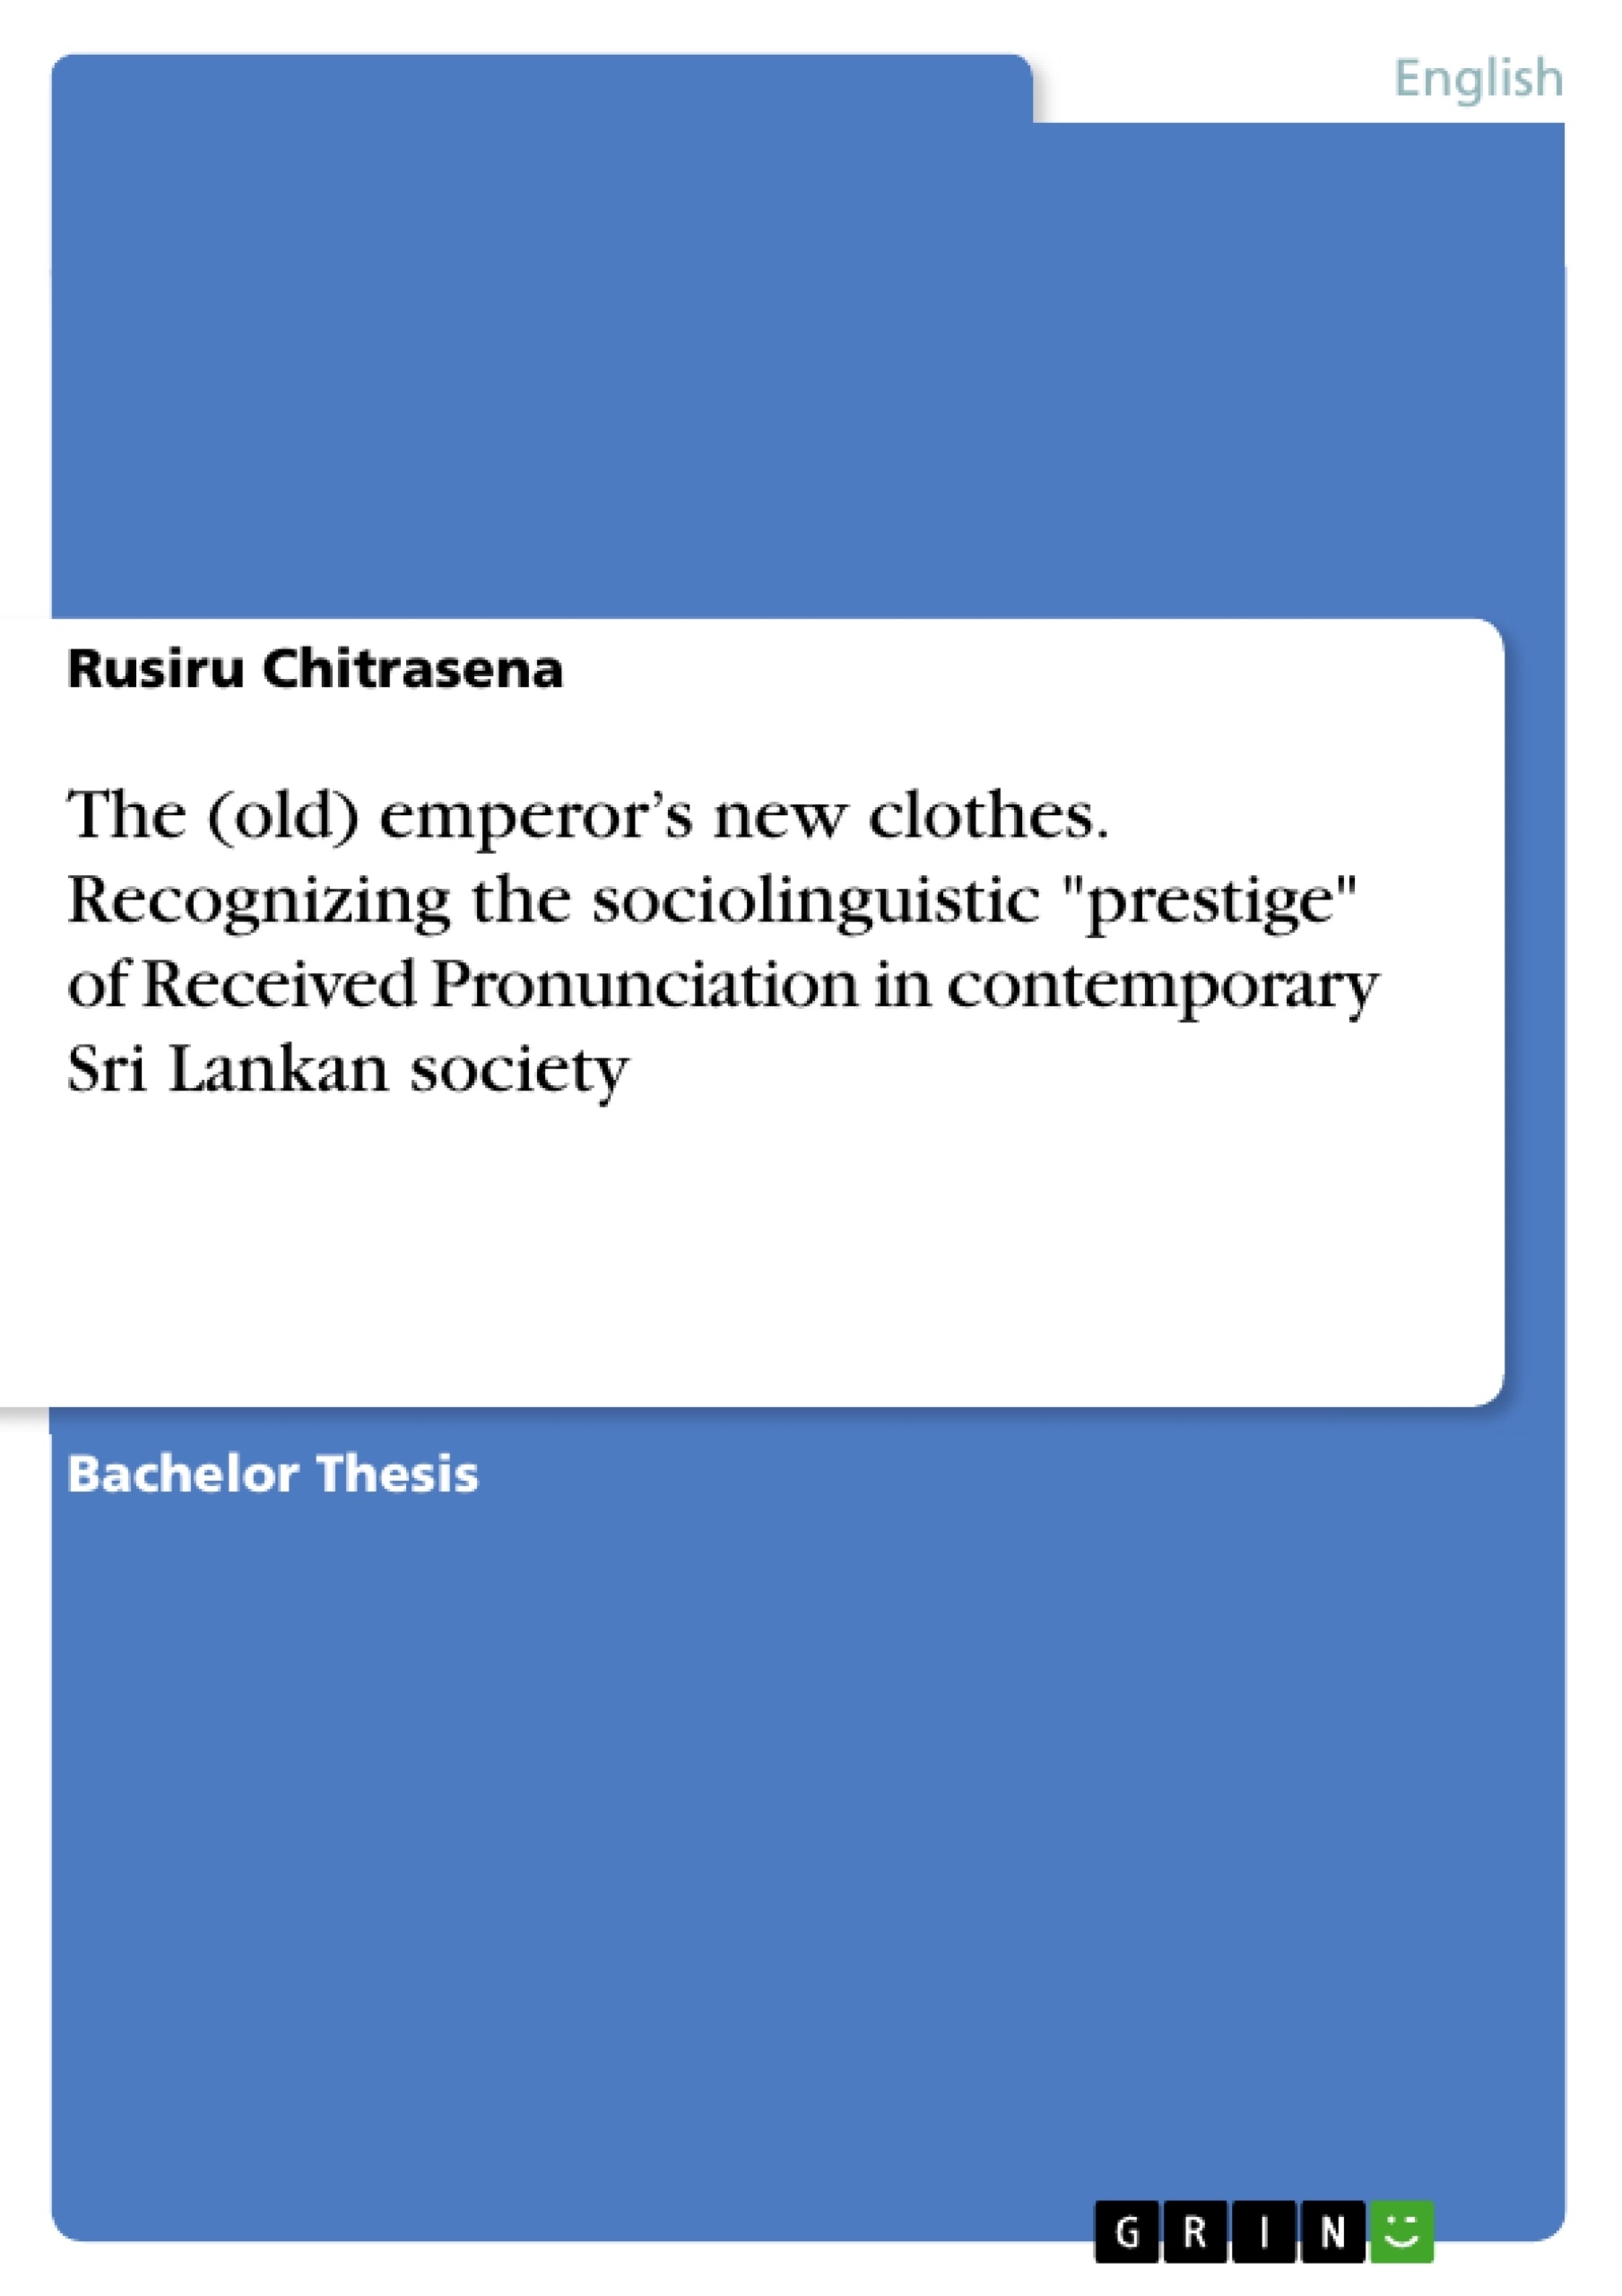 Title: The (old) emperor’s new clothes. Recognizing the sociolinguistic "prestige" of Received Pronunciation in contemporary Sri Lankan society